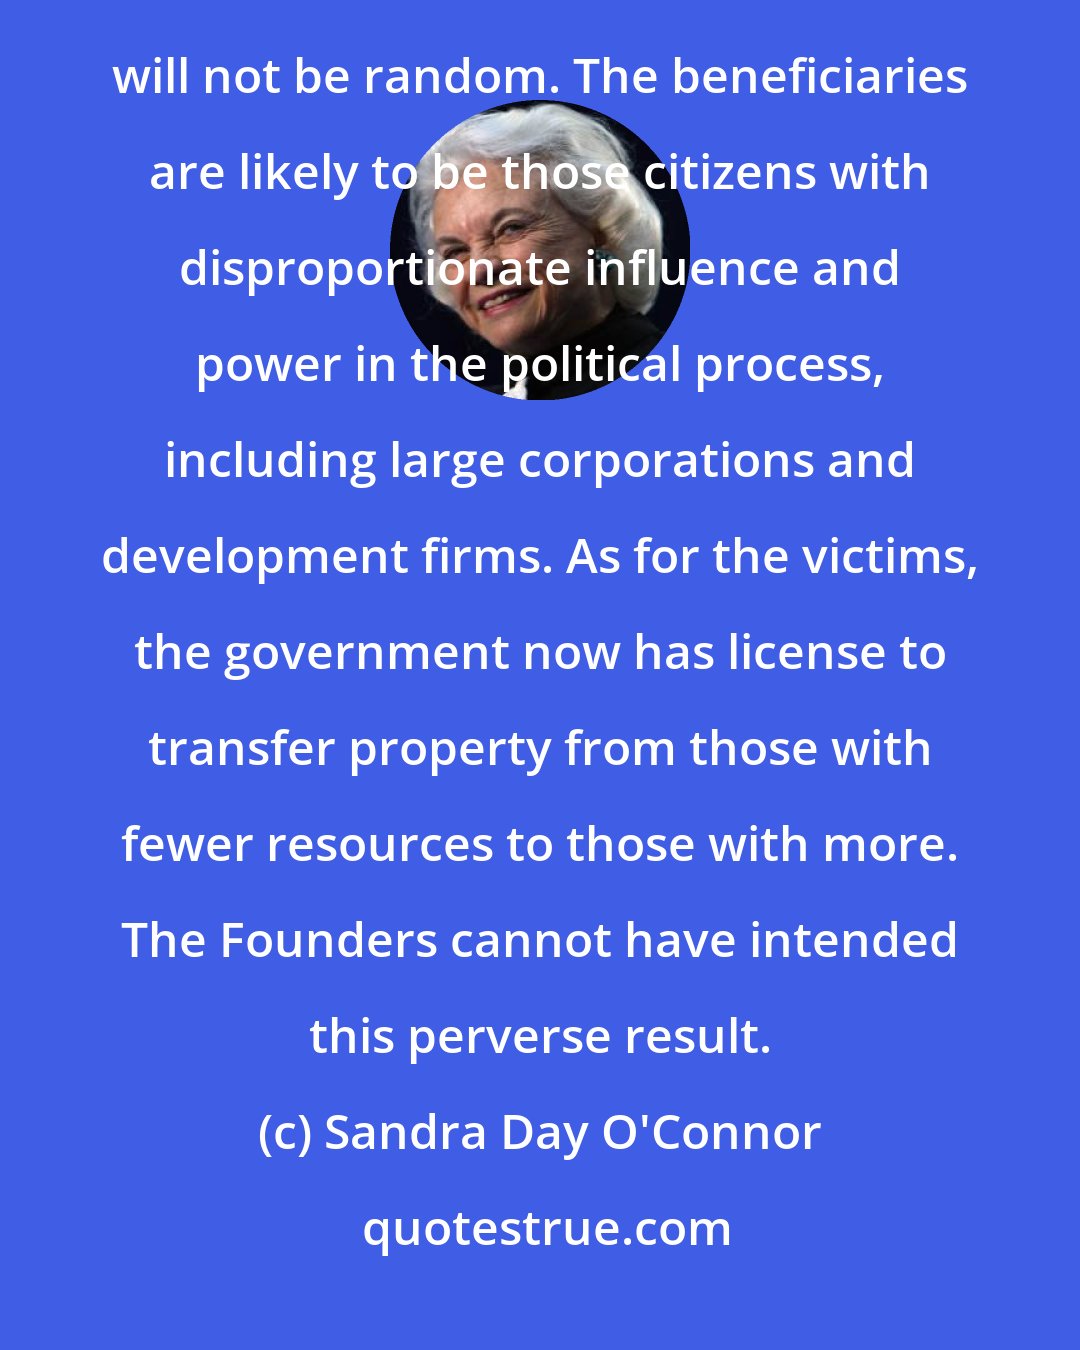 Sandra Day O'Connor: Any property may now be taken for the benefit of another private party, but the fallout from this decision will not be random. The beneficiaries are likely to be those citizens with disproportionate influence and power in the political process, including large corporations and development firms. As for the victims, the government now has license to transfer property from those with fewer resources to those with more. The Founders cannot have intended this perverse result.